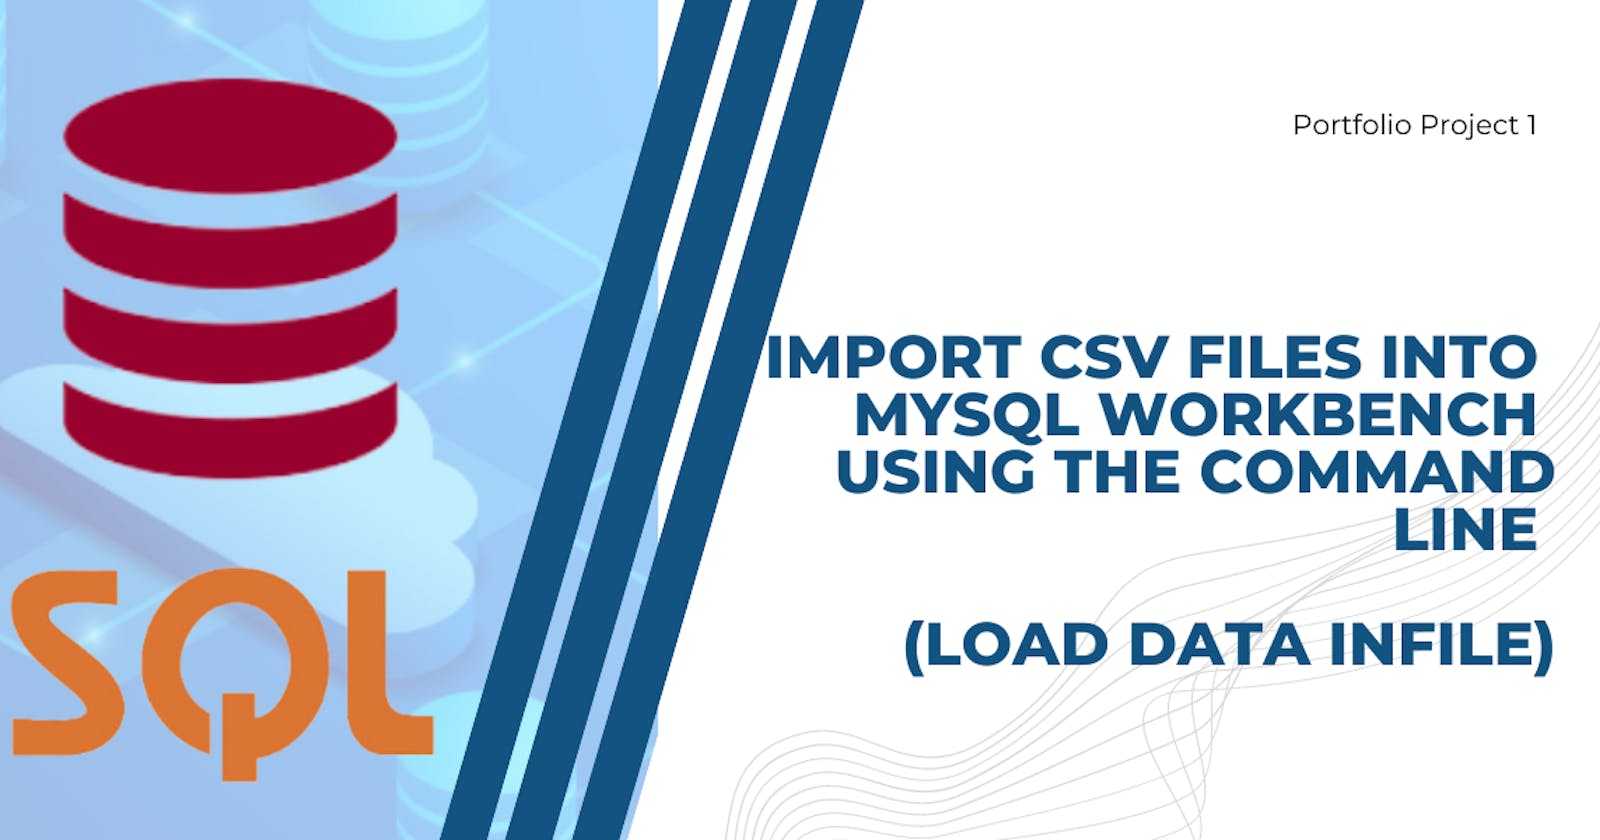 Import CSV files into MySQL Workbench using the command line (LOAD DATA INFILE)